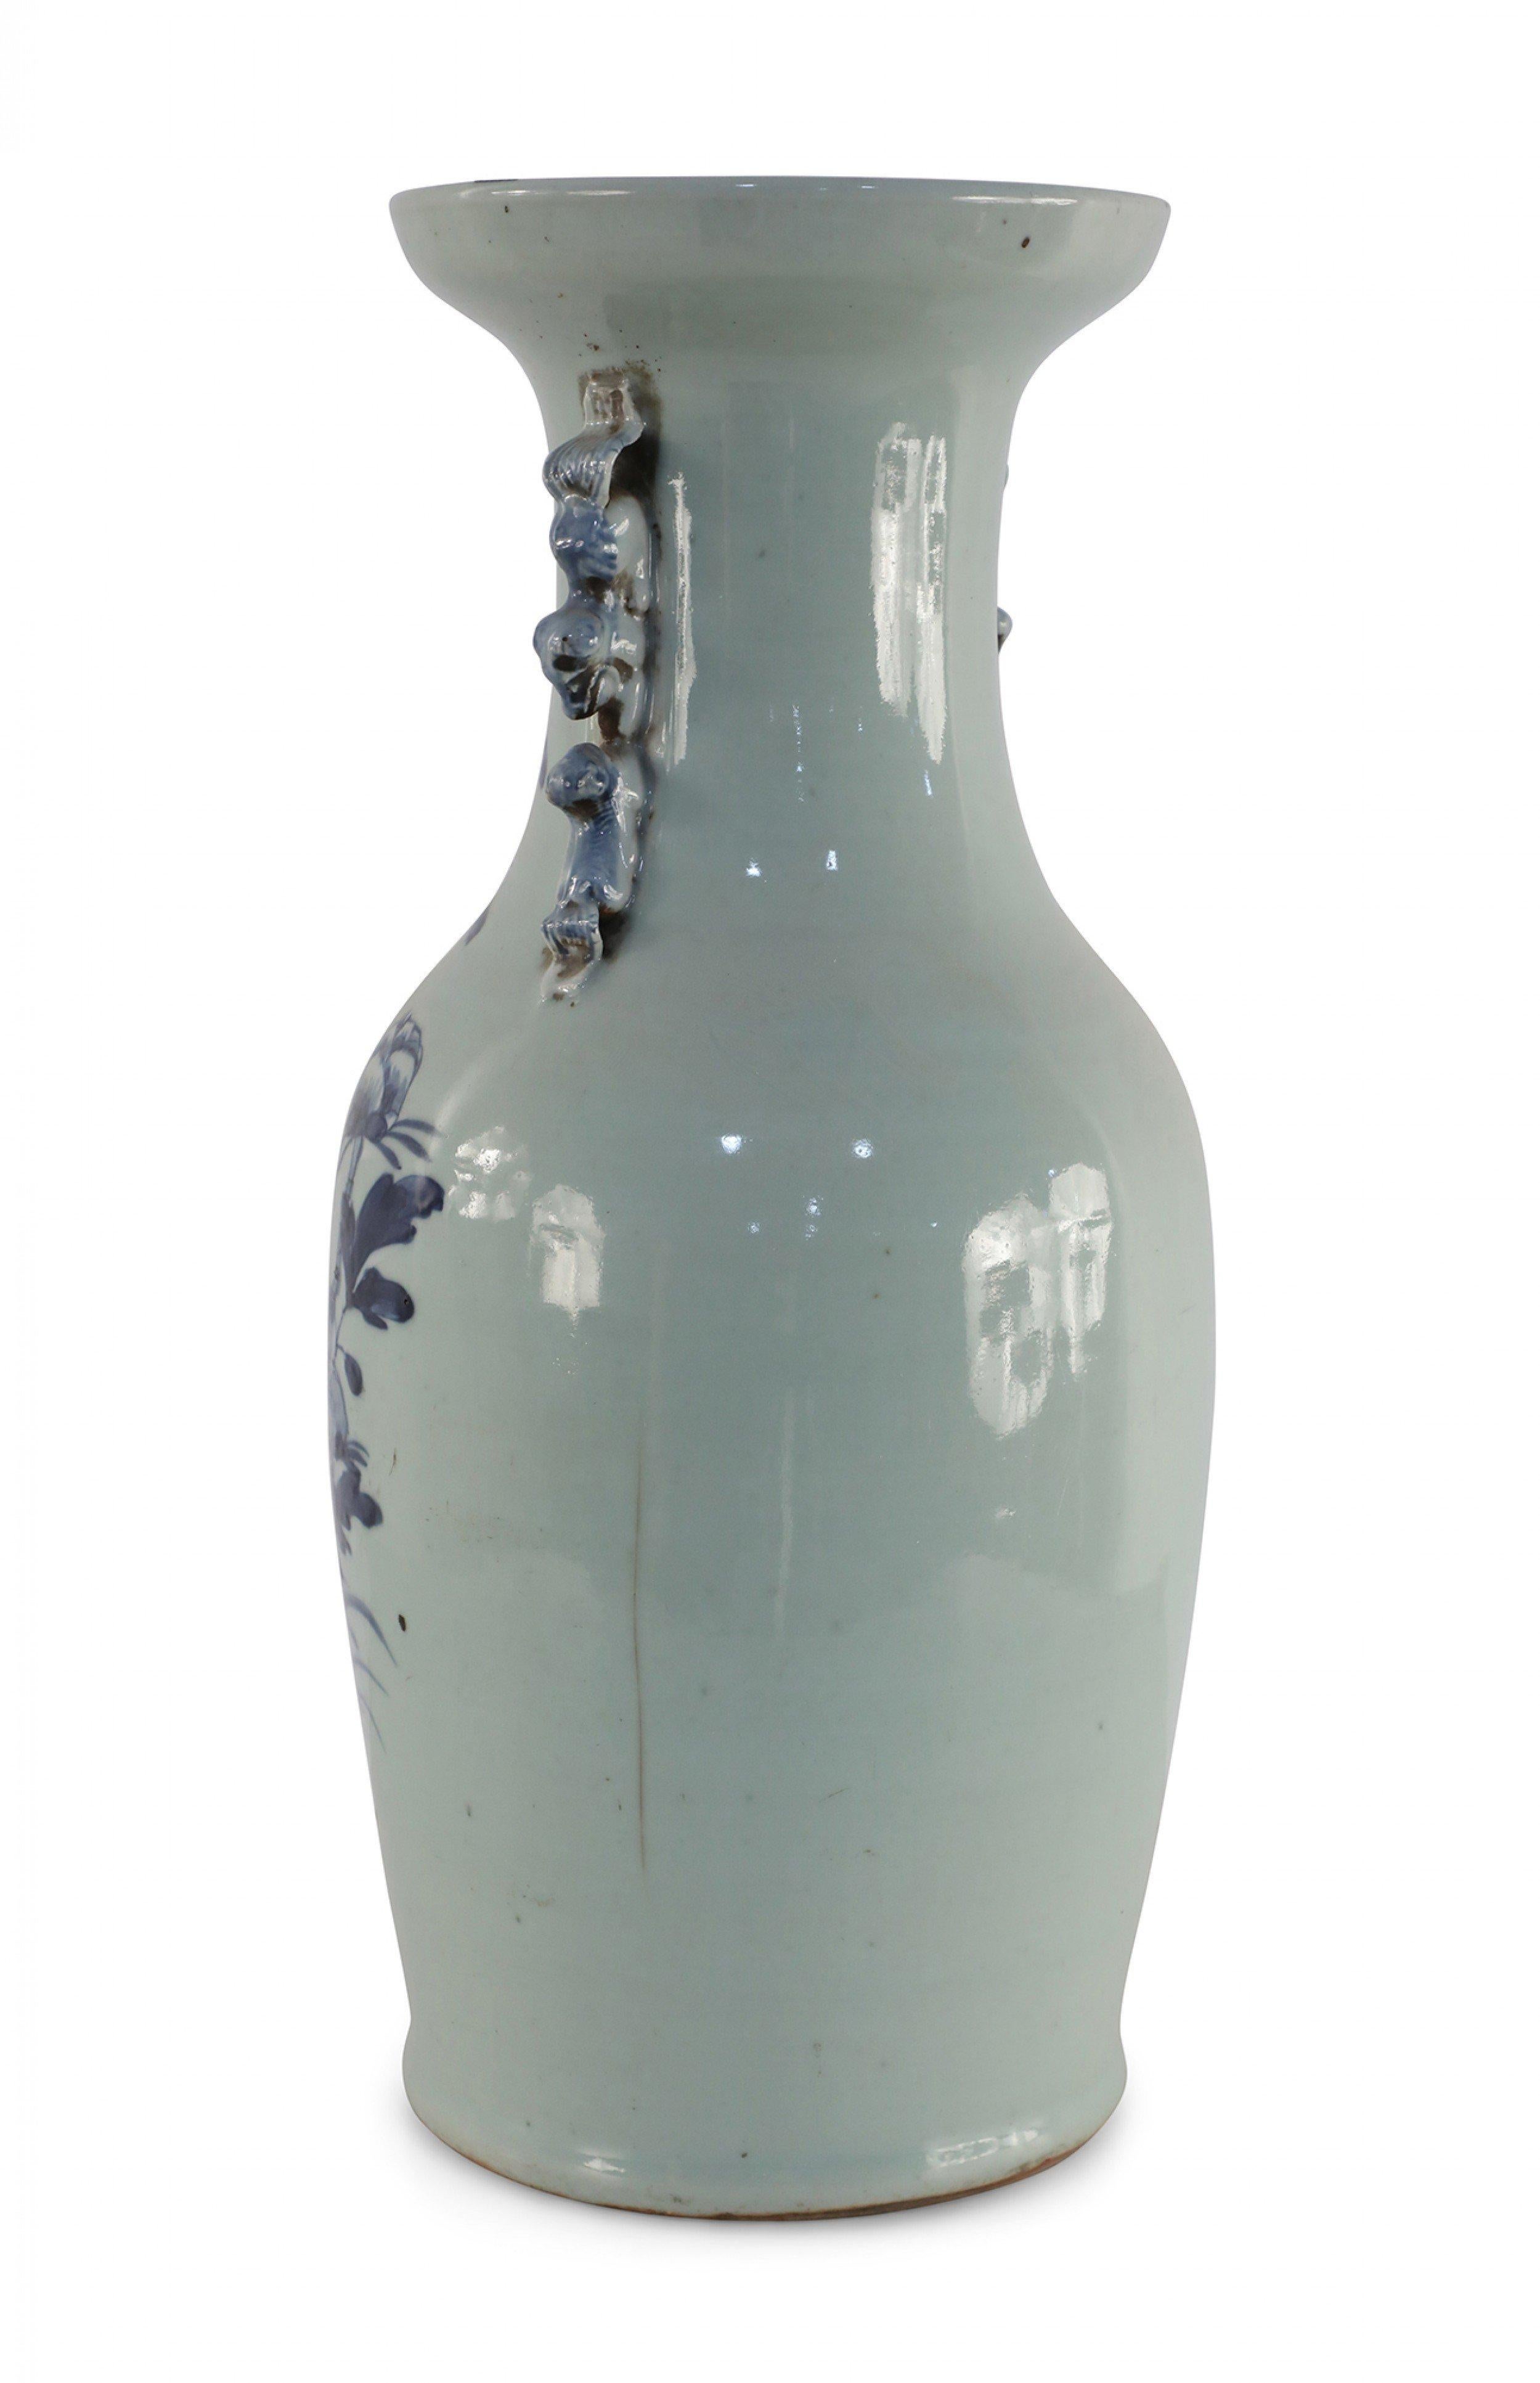 Antique Chinese (Late 19th Century) white, porcelain urn decorated in a blue scene of a bird perched on a flowering branch above water, and accented with two light blue scrolled handles along the neck.
  